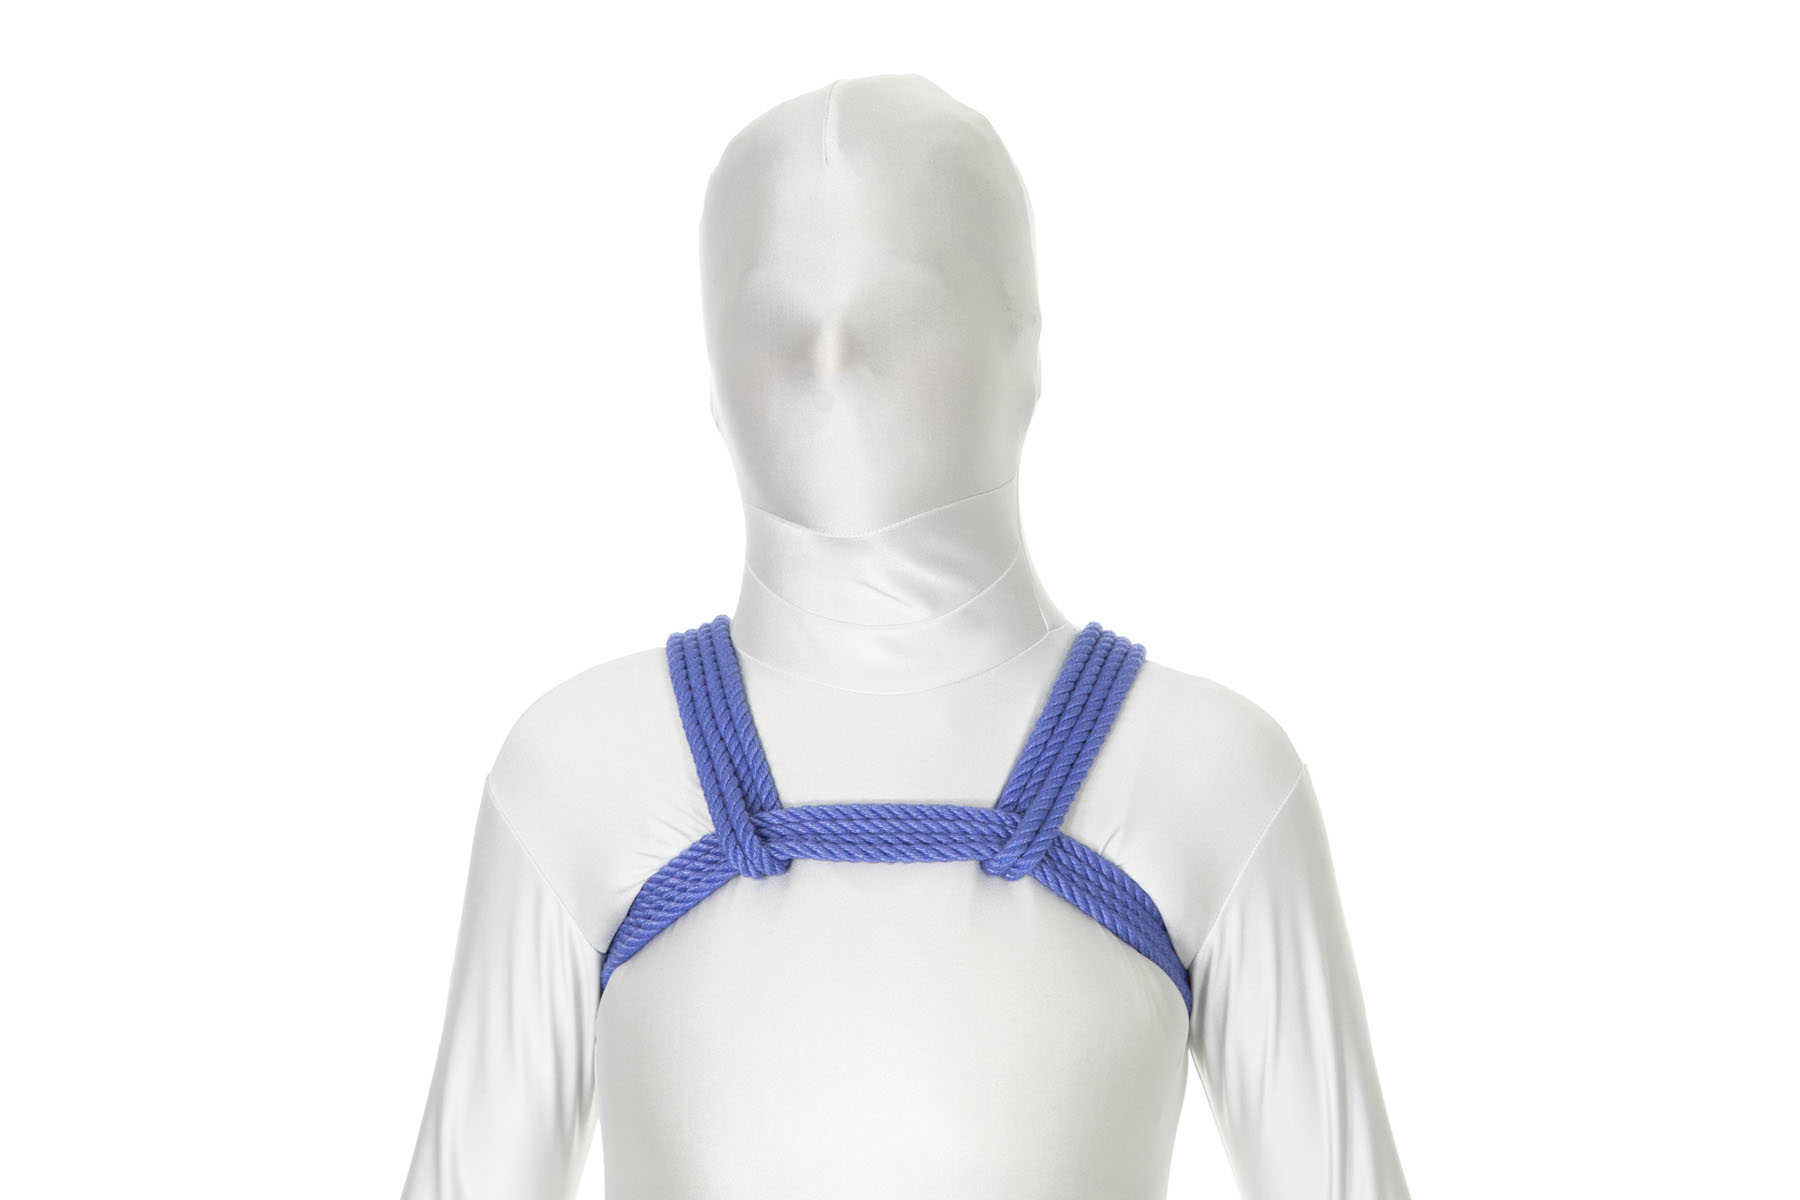 A person in a white bodysuit wearing a chest harness made of blue rope. A band of four strands of blue rope crosses high on their chest and goes under their armpits. A doubled rope comes over each shoulder, goes under the chest wrap, and then doubles back and goes over the shoulder.